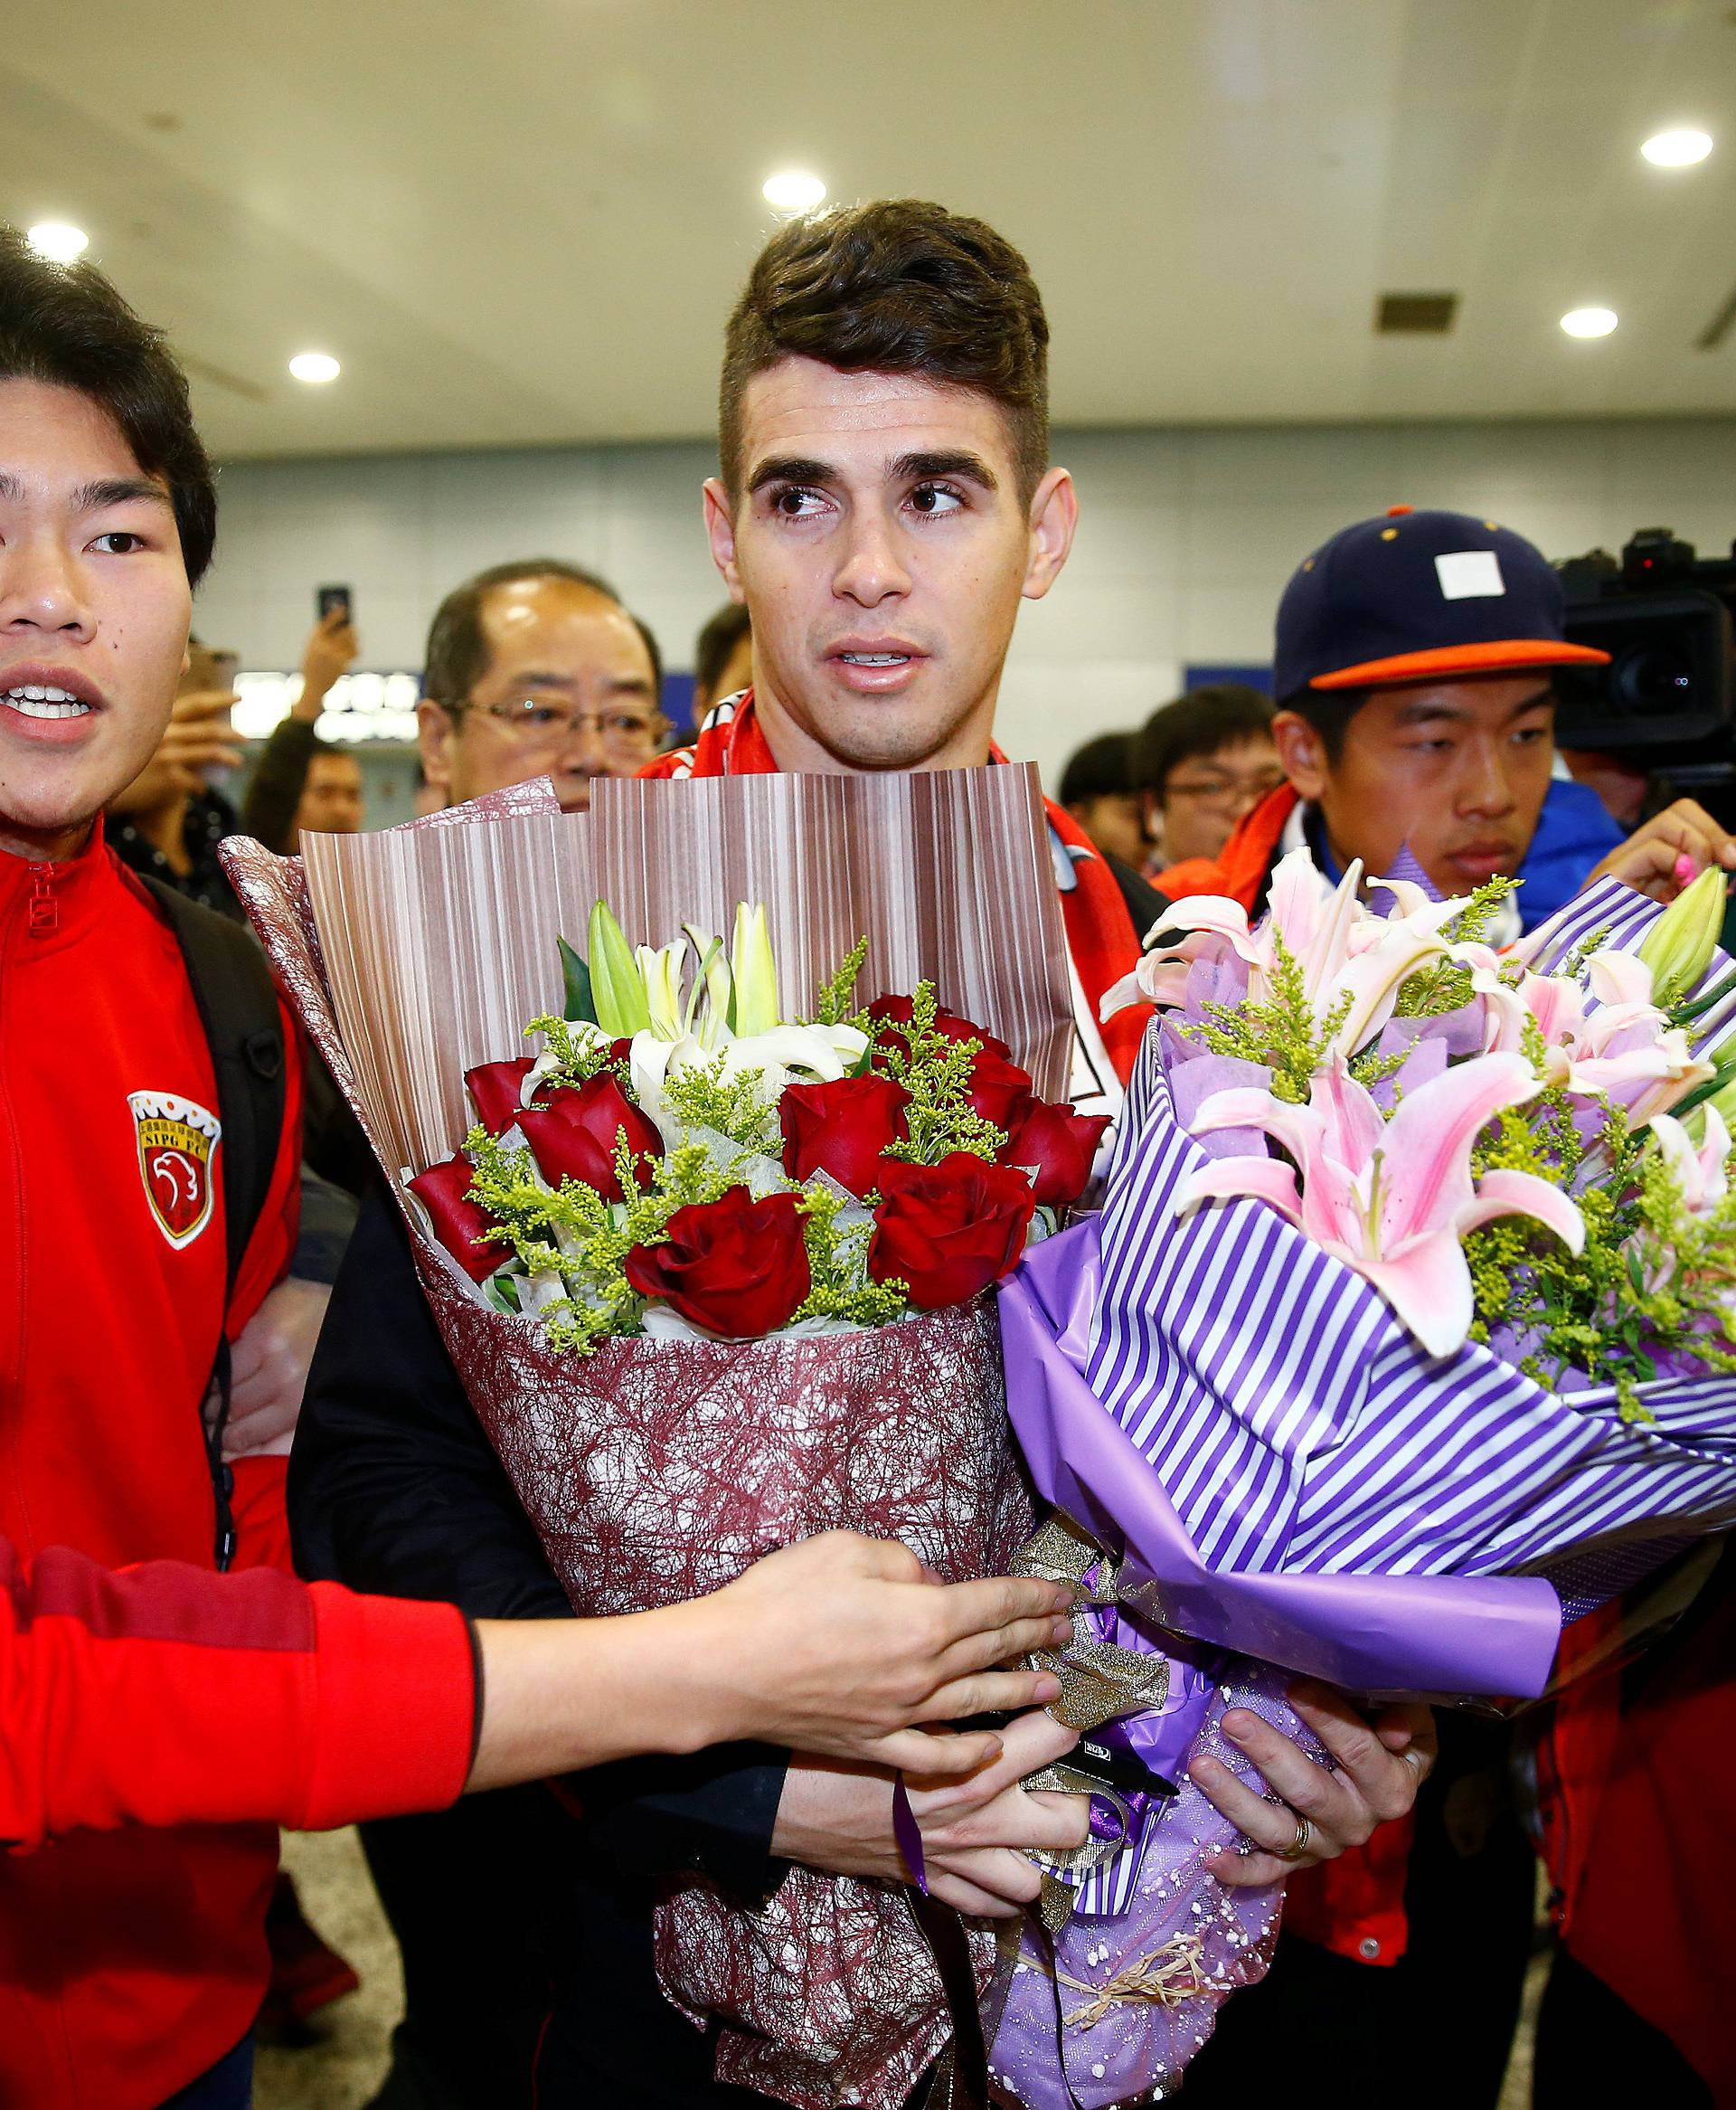 Brazilian international midfielder Oscar arrives at the Shanghai Pudong International Airport, after agreeing to join China super league football club Shanghai SIPG from Chelsea in Shanghai